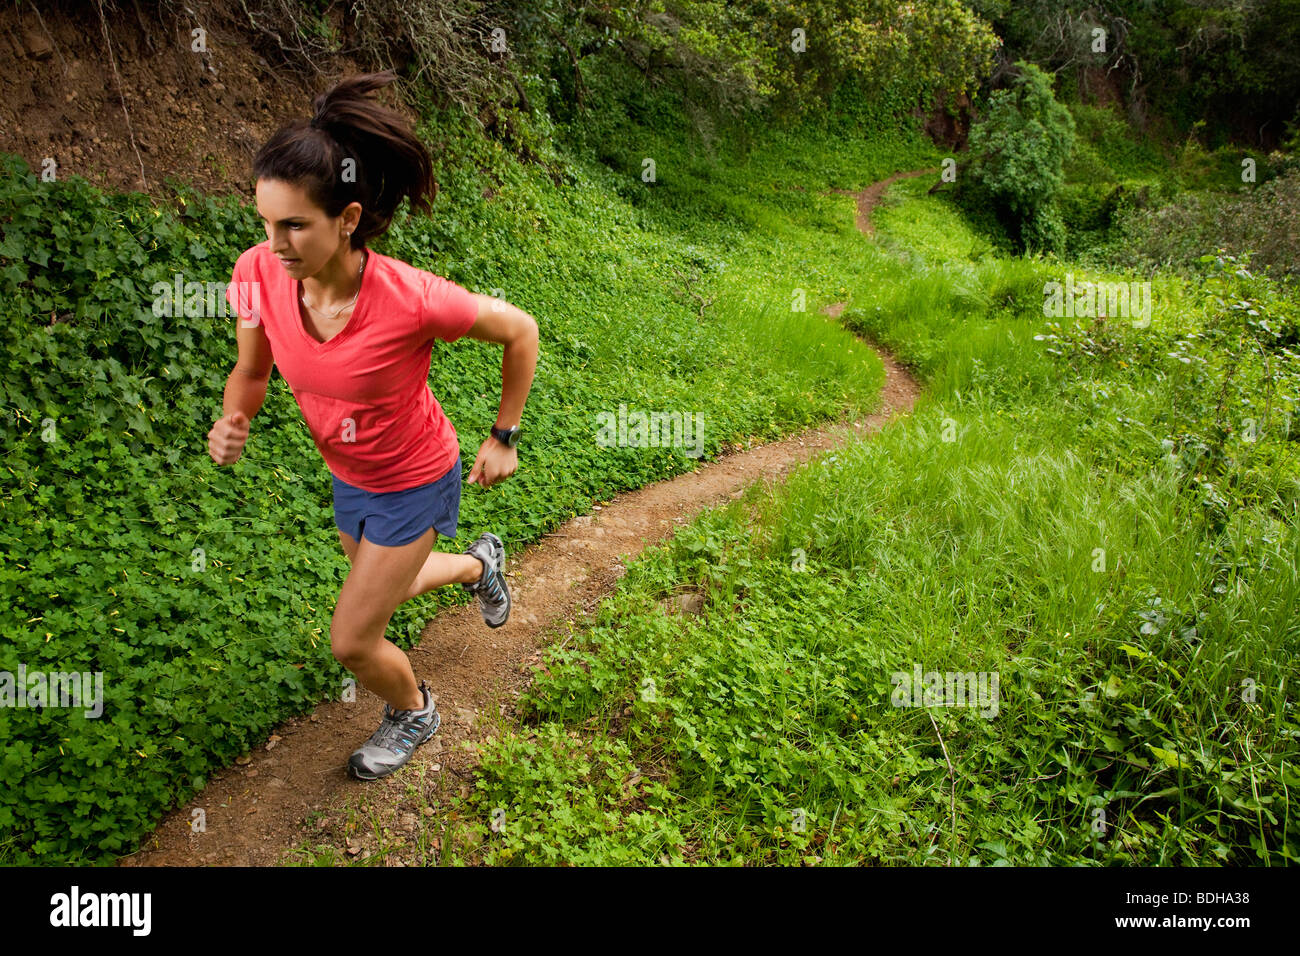 Woman trail running through a green meadow in the woods. Stock Photo